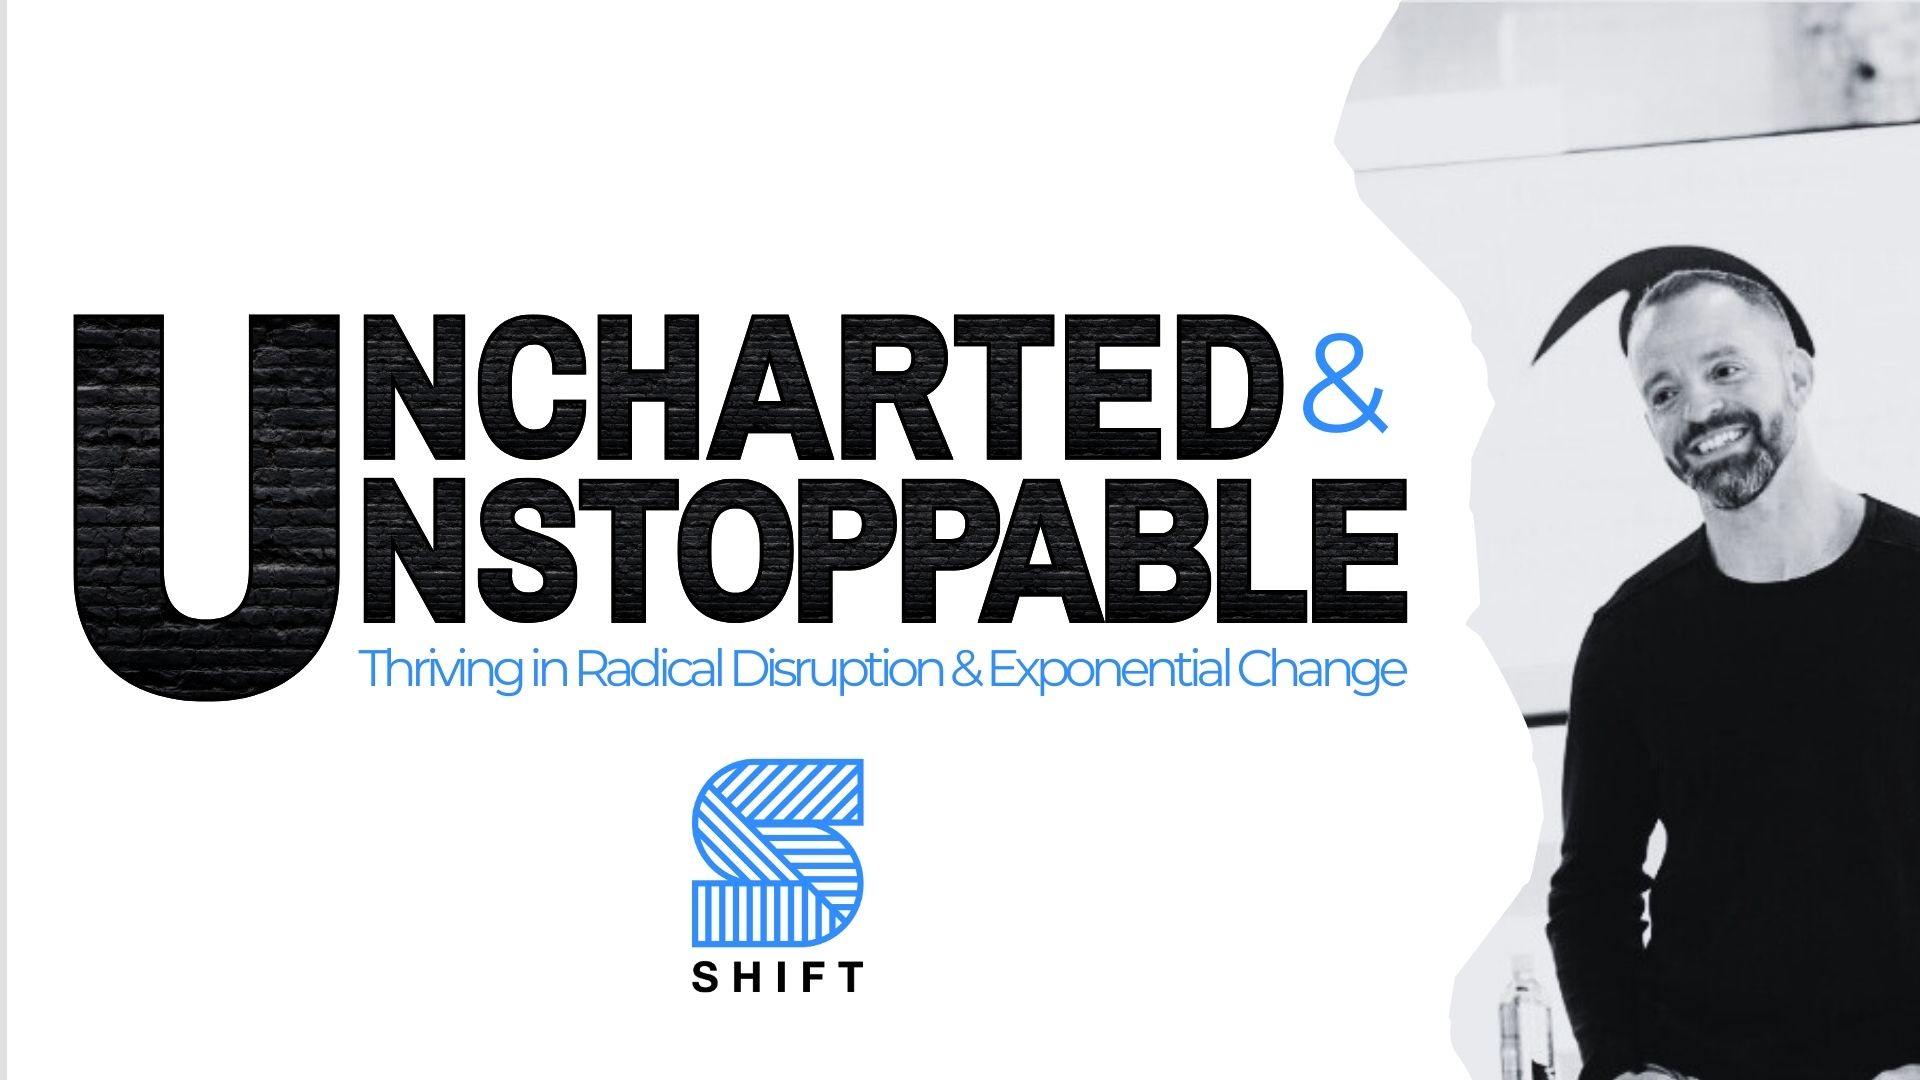 Uncharted & Unstoppable Thriving through Radical Disruption and Exponential Change